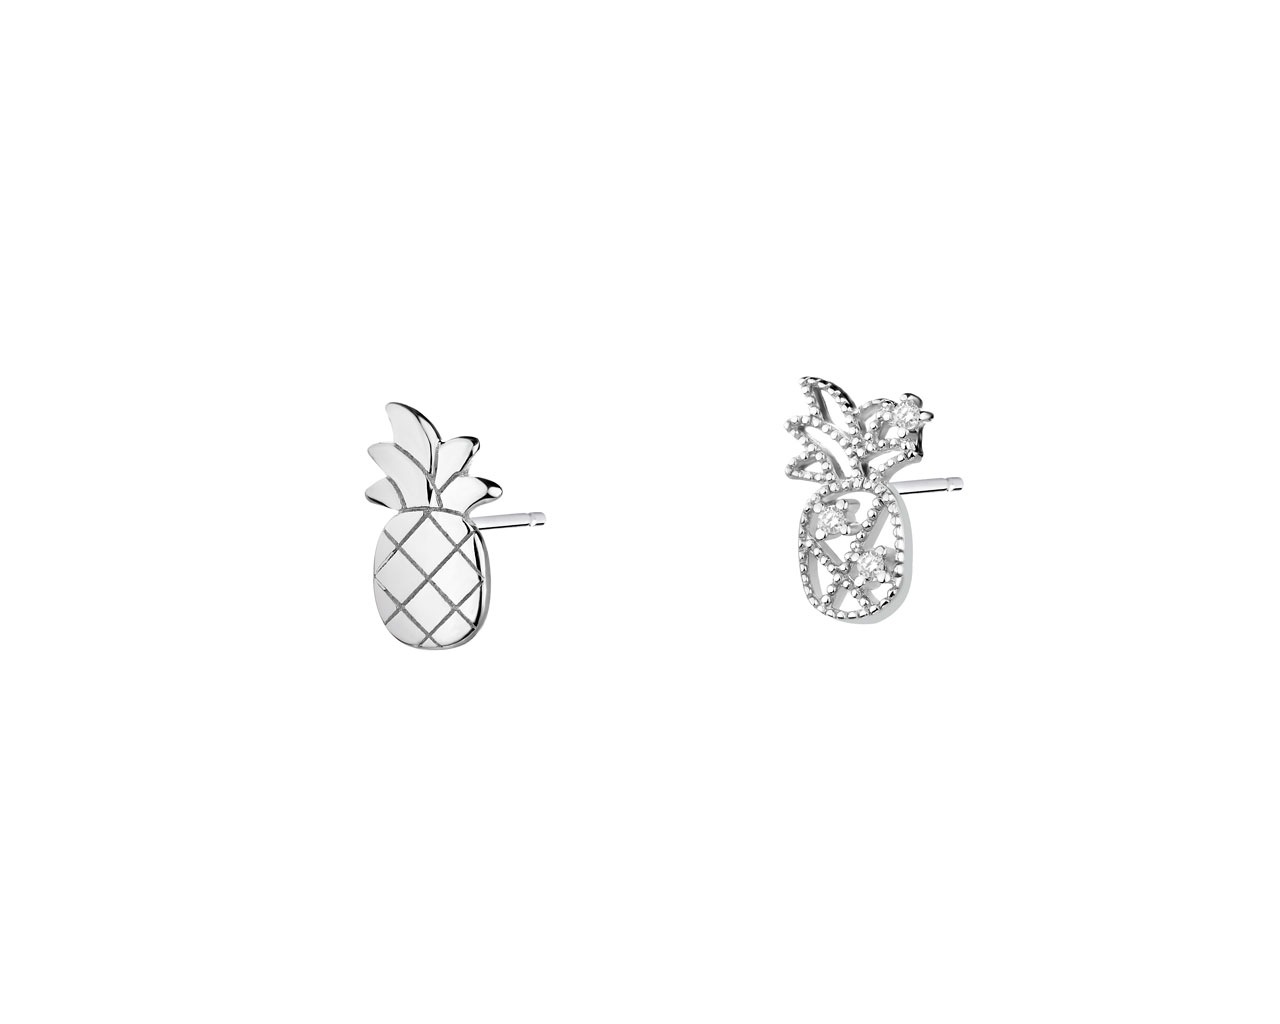 Sterling Silver Earrings with Cubic Zirconia - Pineapple